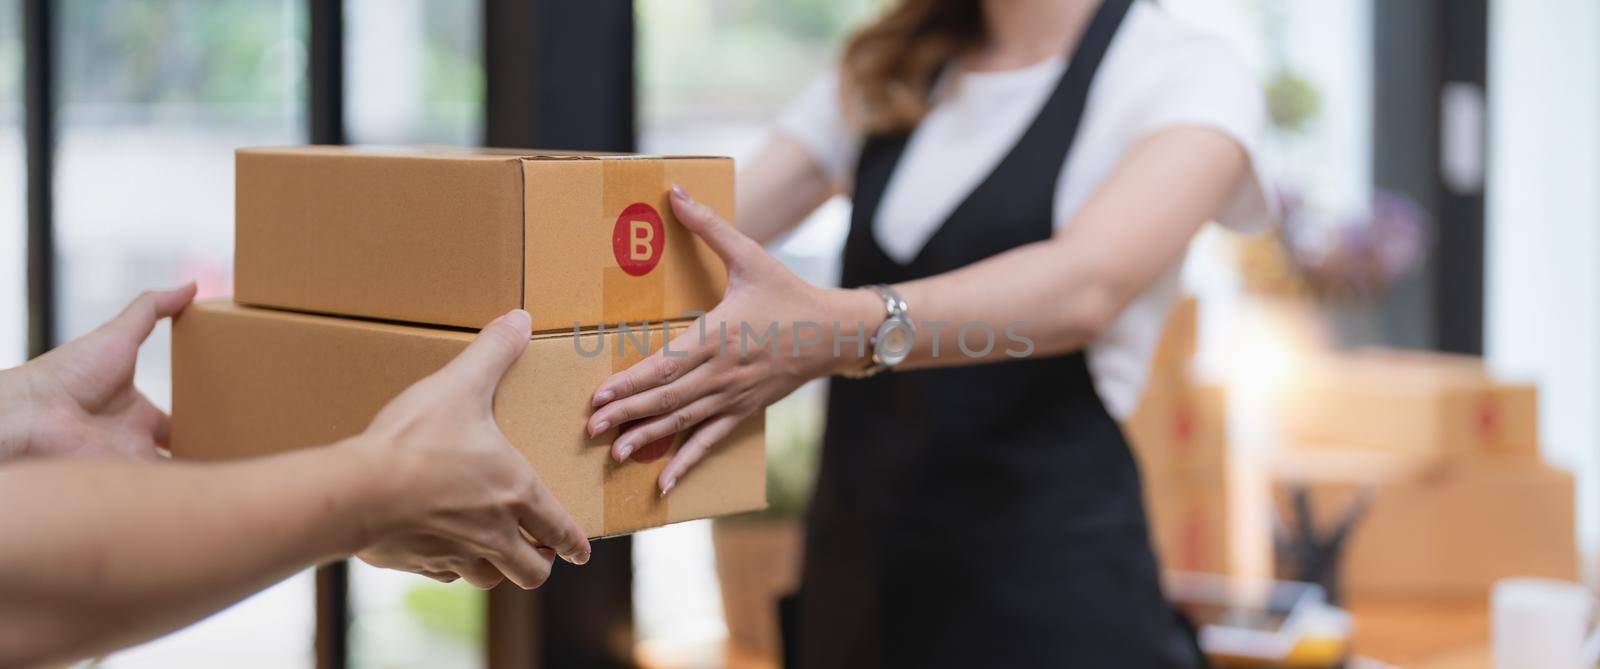 customer receiving a cardboard boxes parcel from delivery man in the morning, delivery service concept. by nateemee